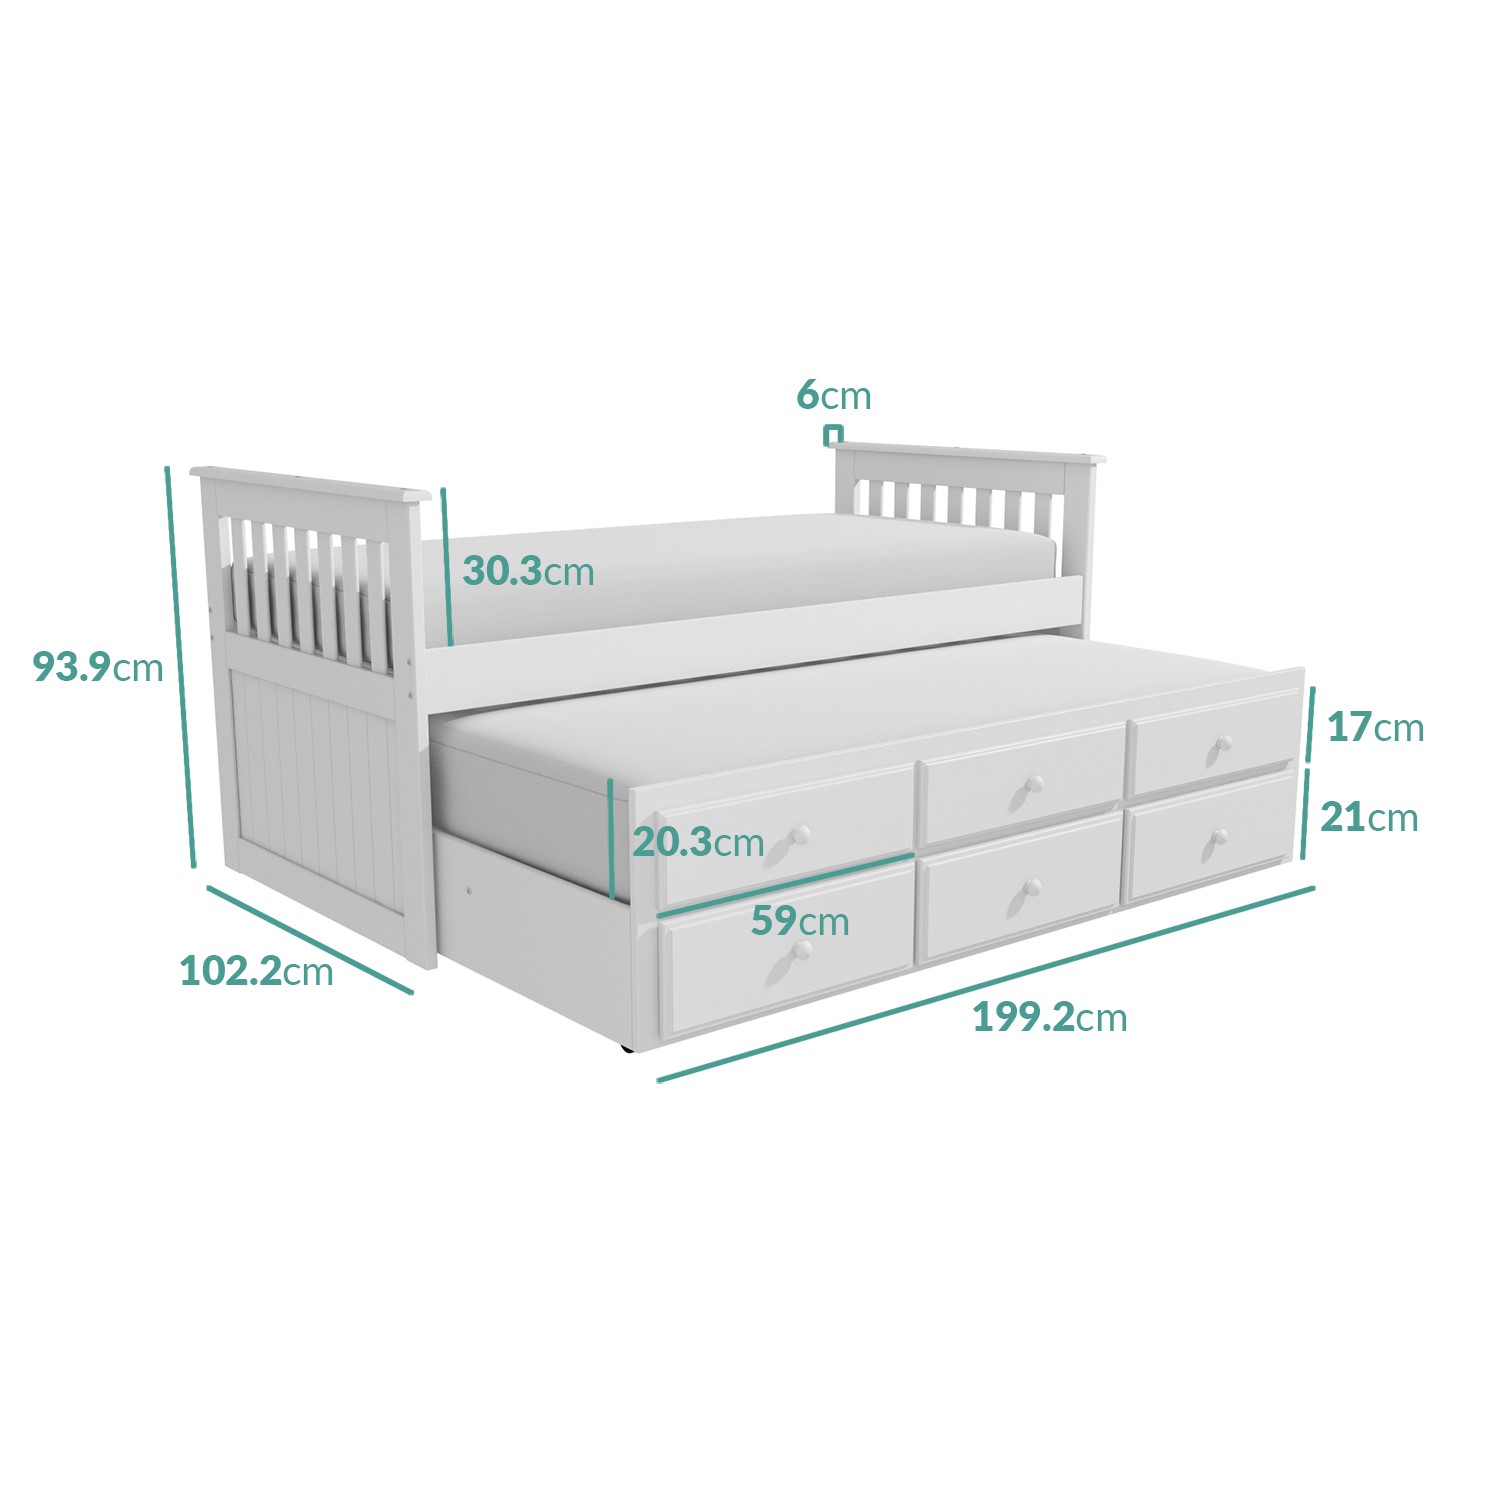 Read more about Single white wooden guest bed with storage and trundle oxford